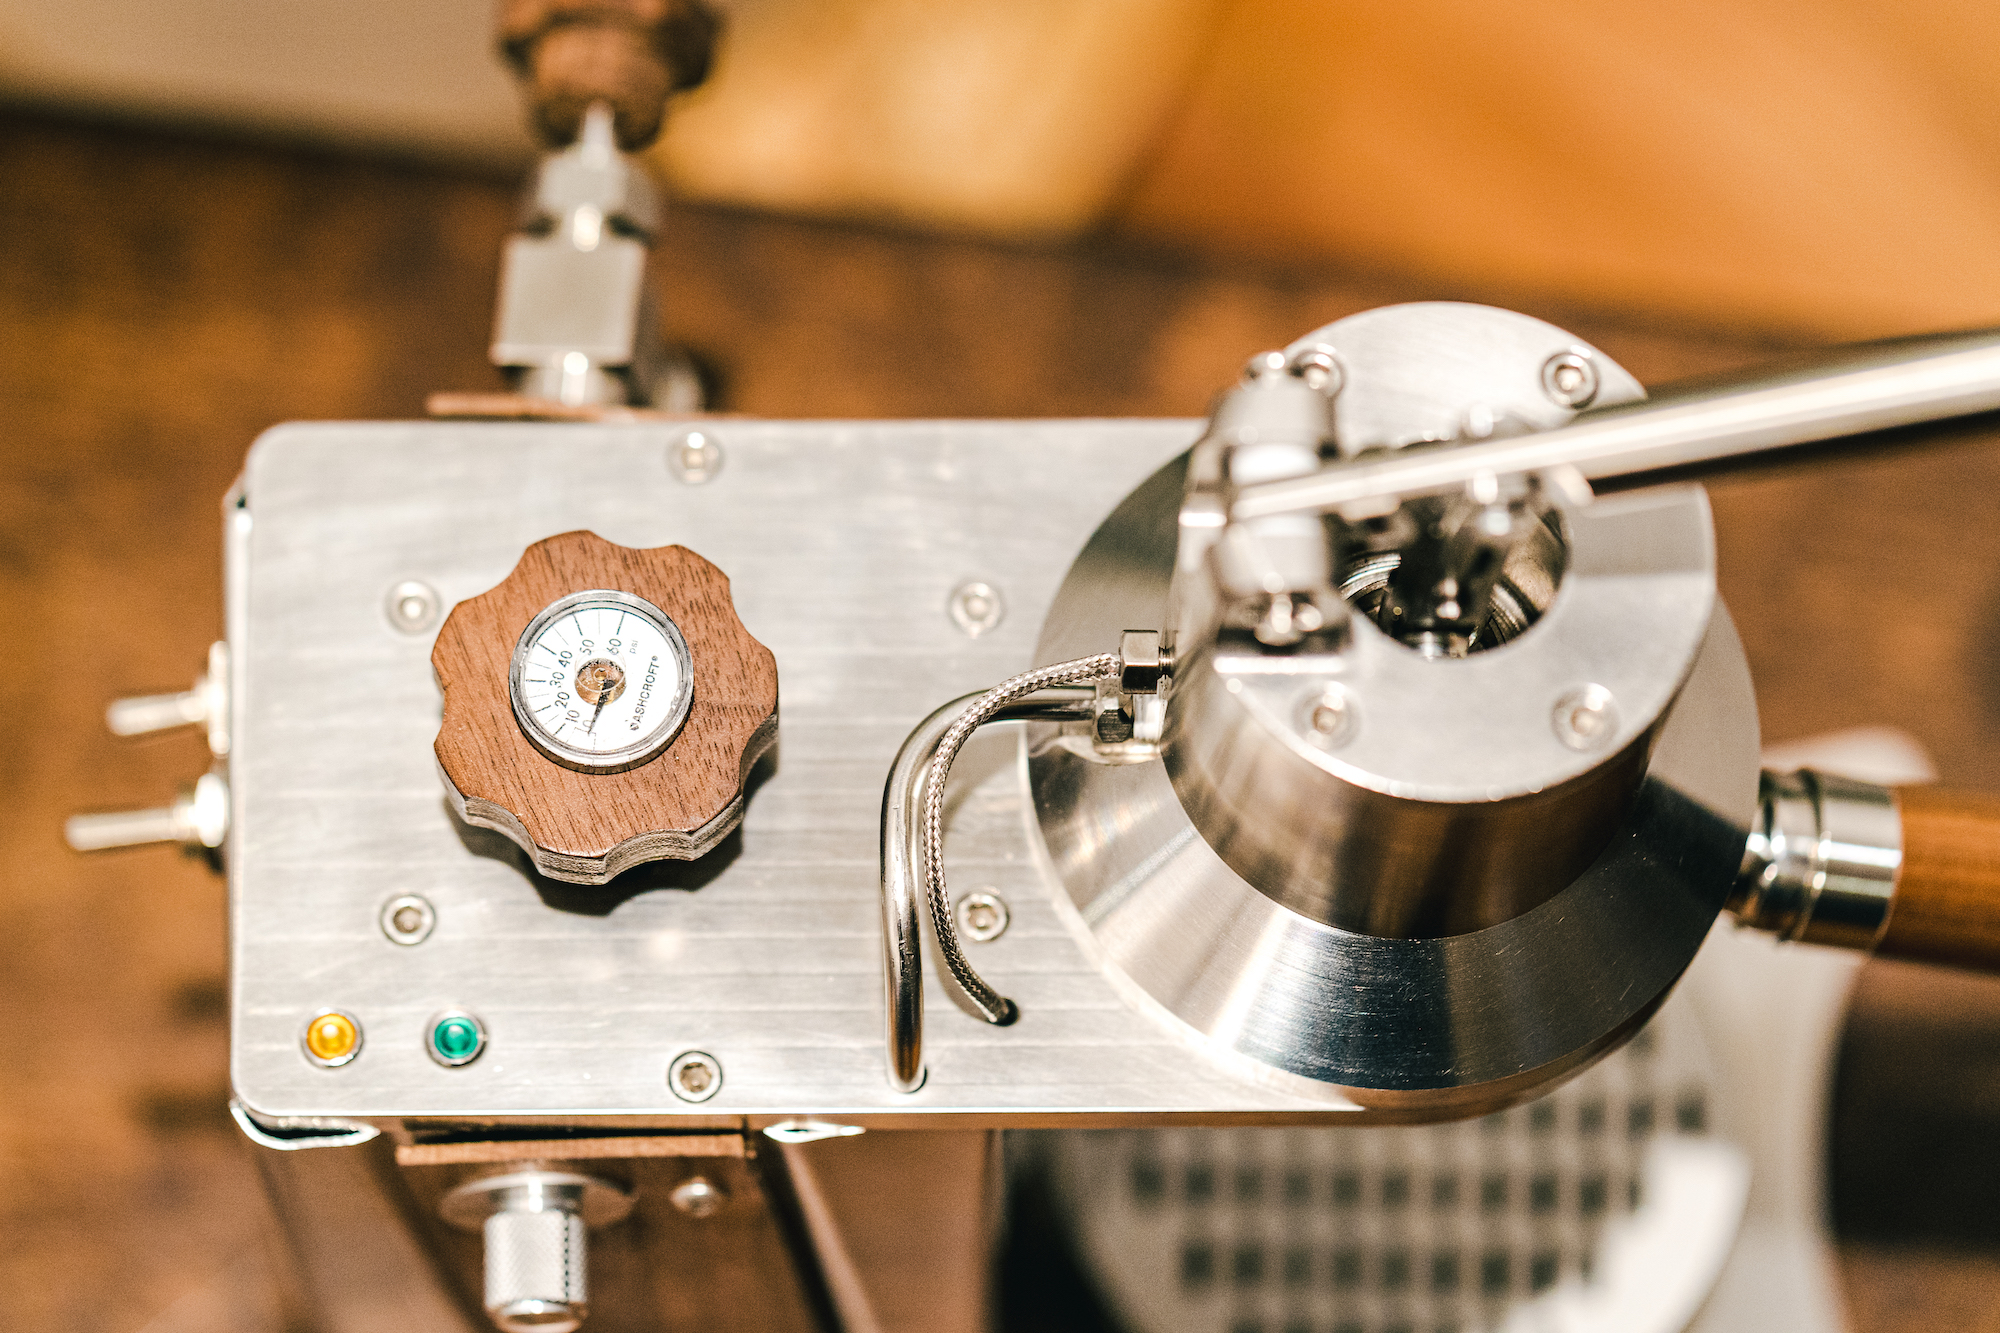 Odyssey Espresso Begins its Journey with the Argos Manual Lever